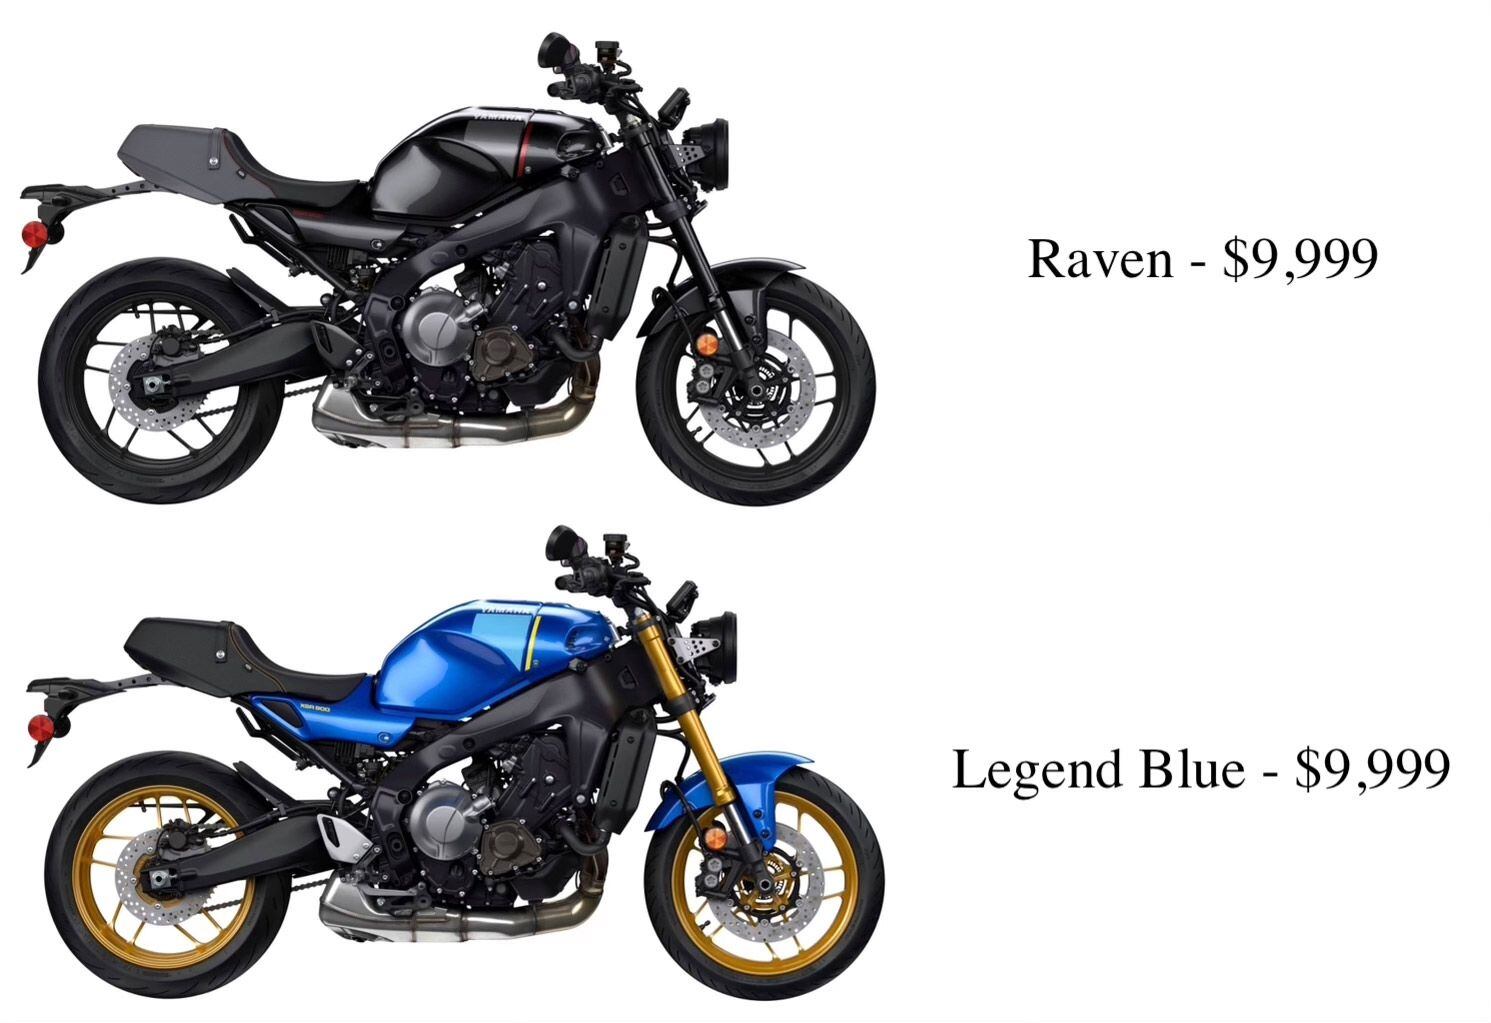 It’s hard to argue against the XSR900 in Legend Blue, but Raven is an option for those opposed to attracting attention to themselves.